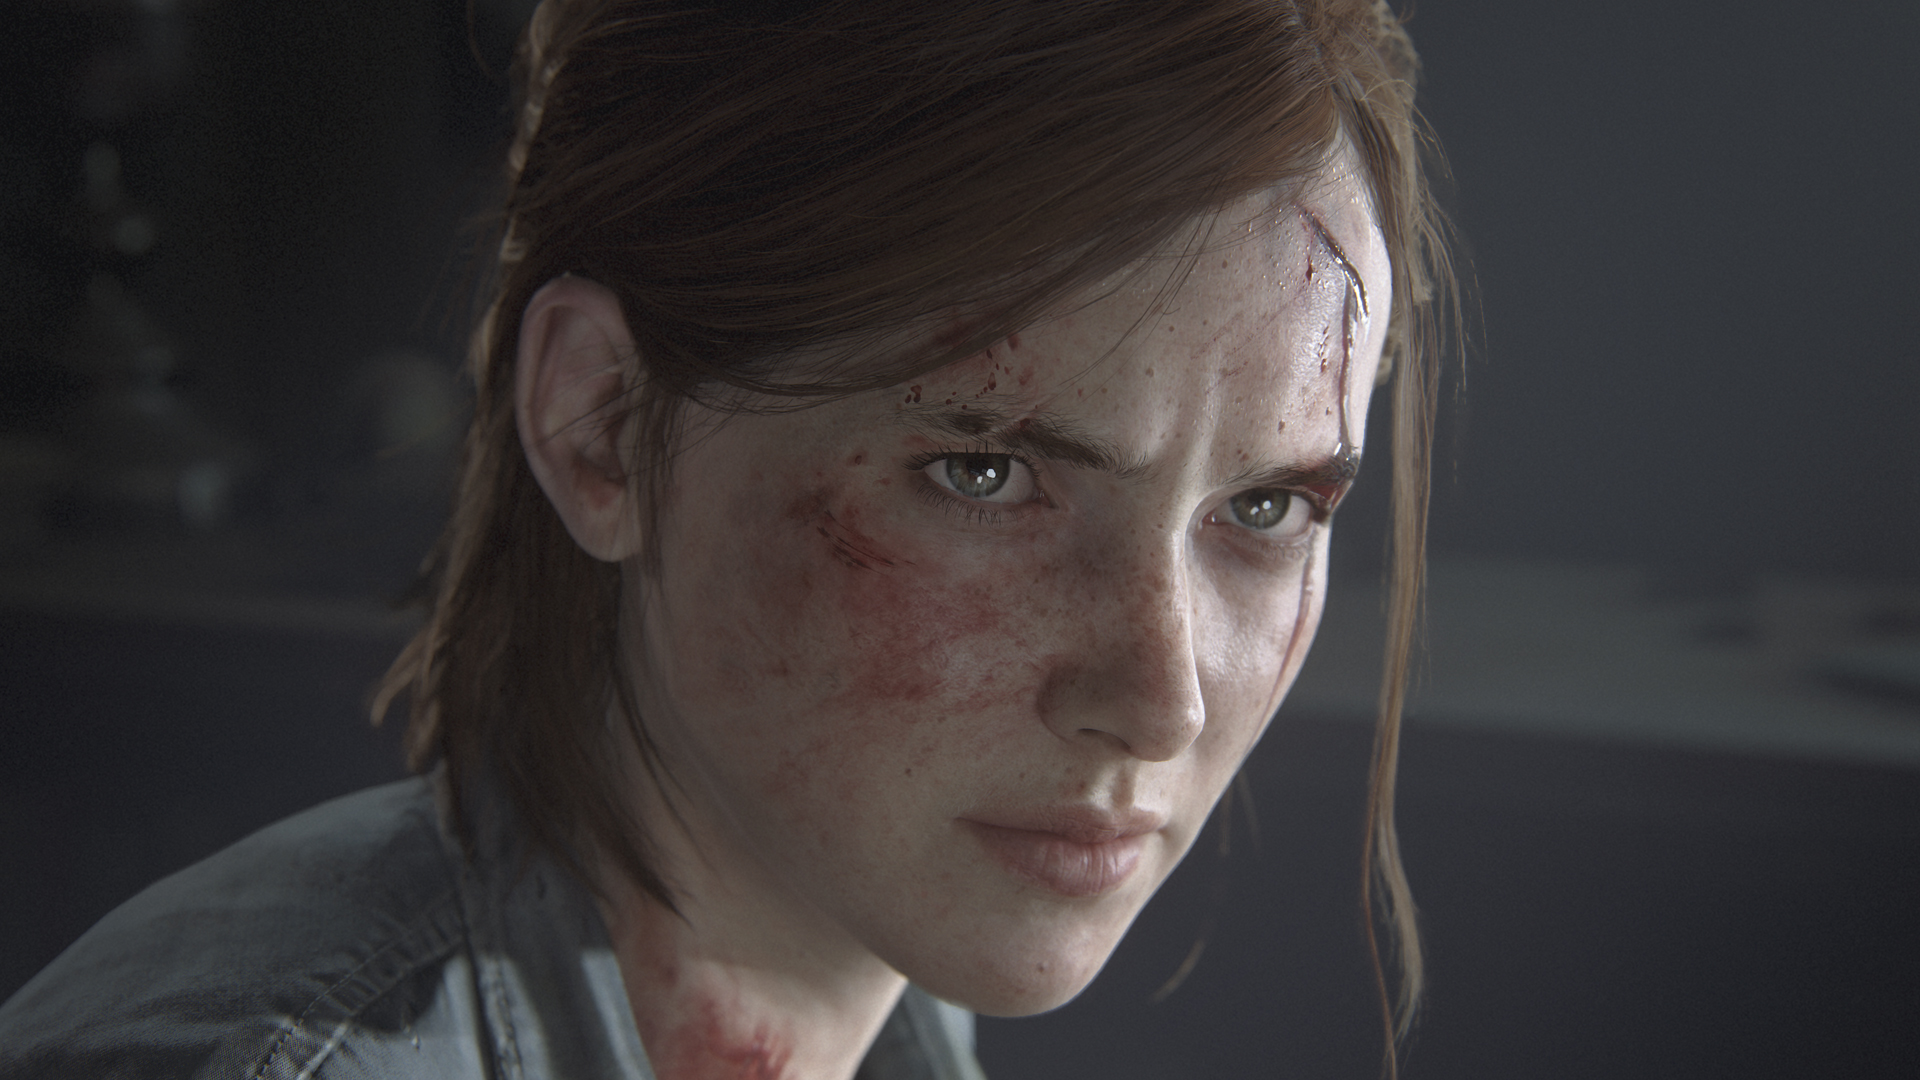 The Last of Us multiplayer is delayed, but Naughty Dog is working on a new single-player game